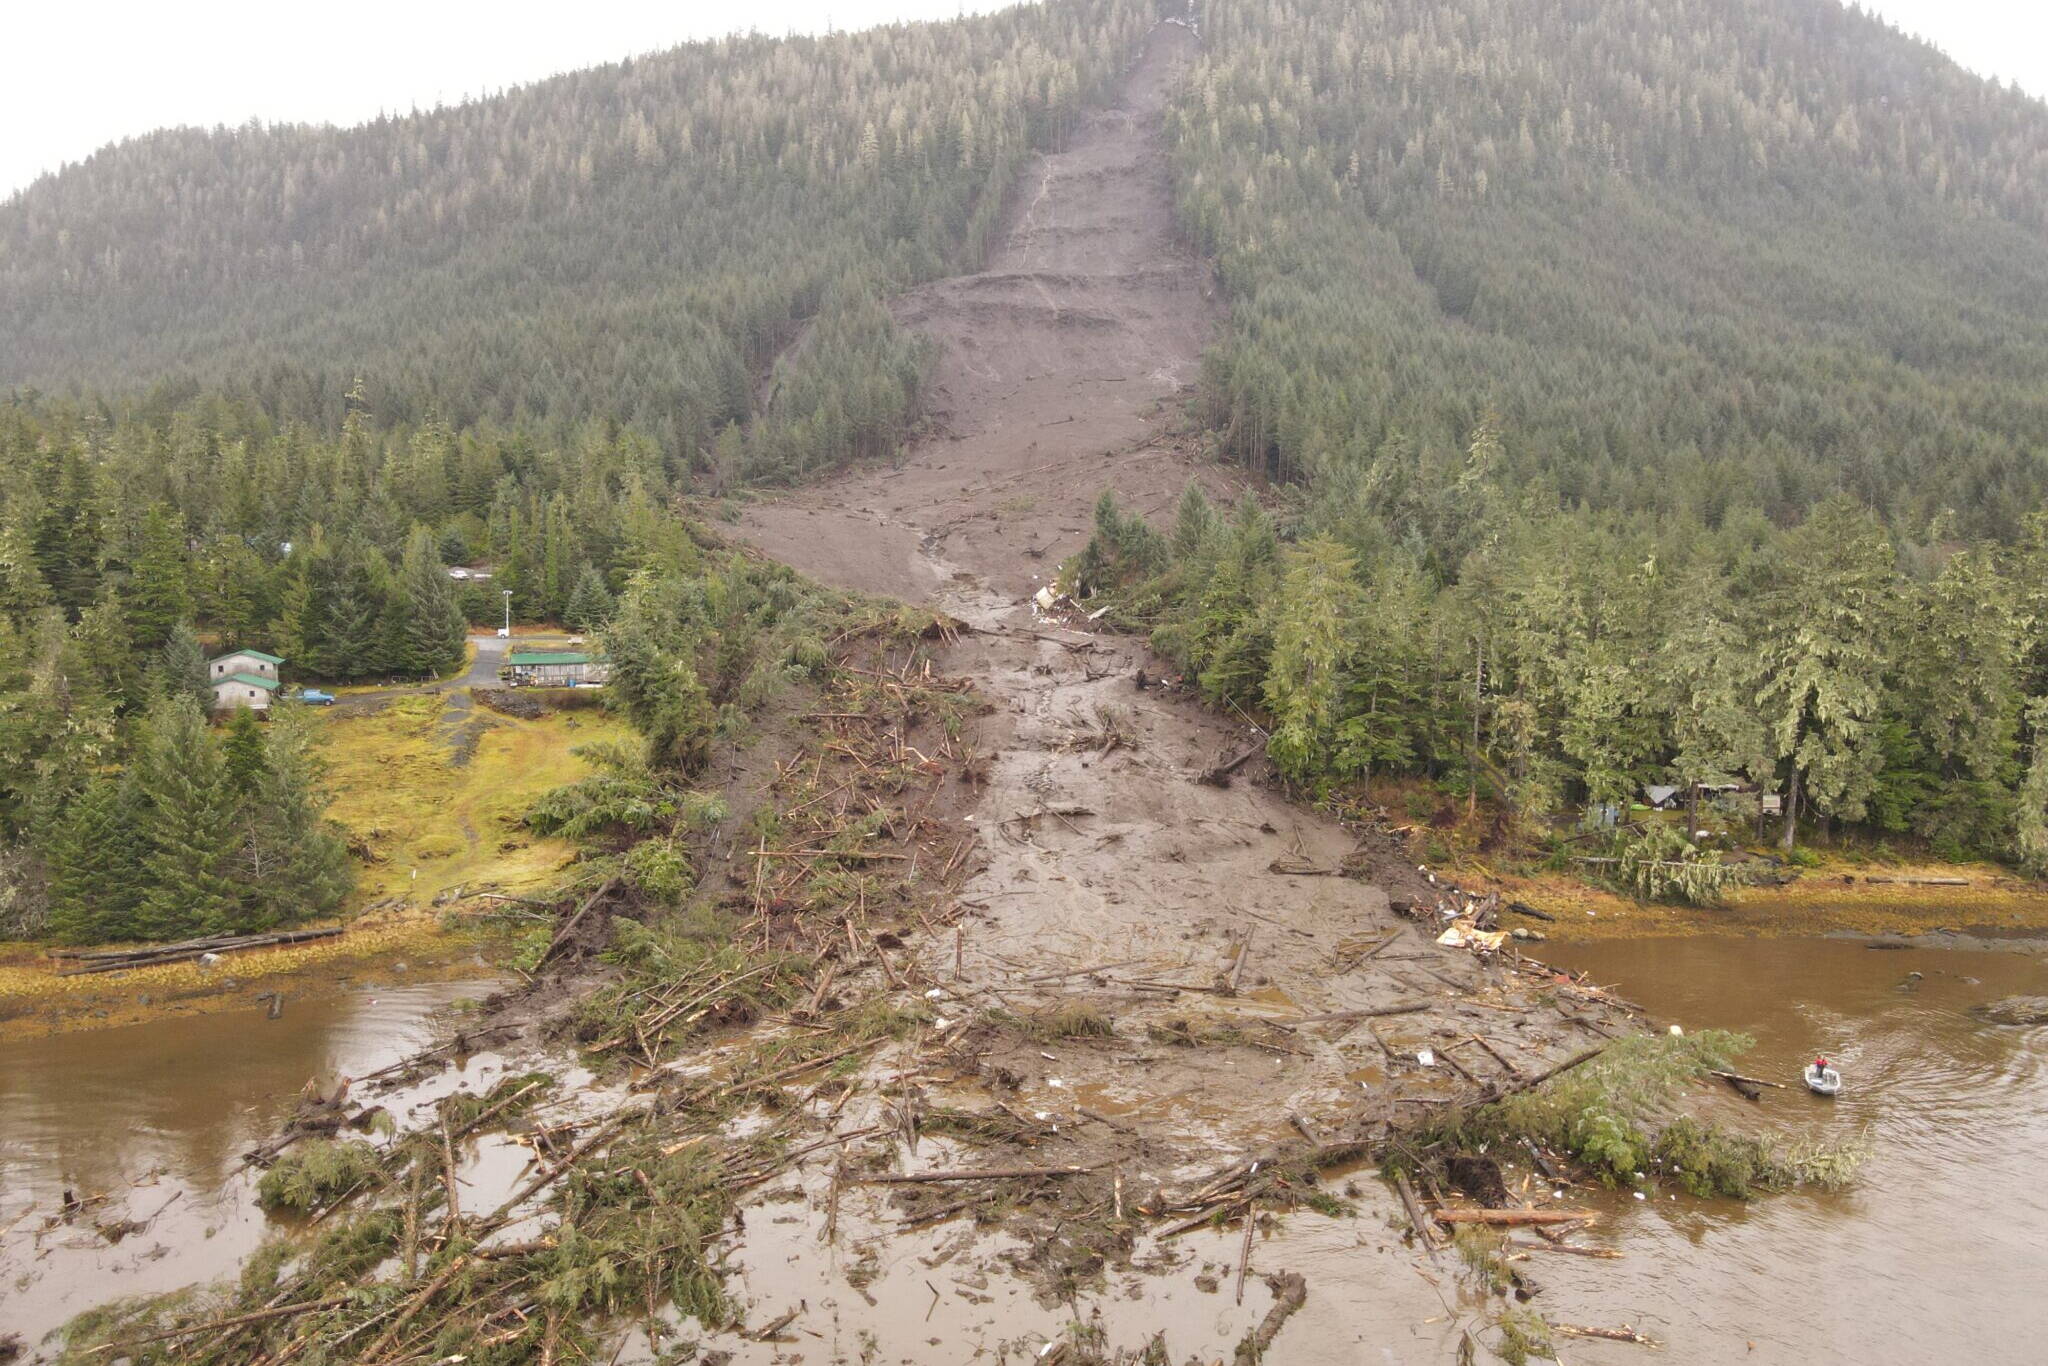 The deadly landslide that struck Wrangell on the night of Nov. 20 is seen the next day. Southeast Alaska is, by nature, vulnerable to such landslides, but climate change is adding to the risk by bringing more precipitation and more extreme rainfall events. (Photo provided by Alaska Department of Transportation and Public Facilities)